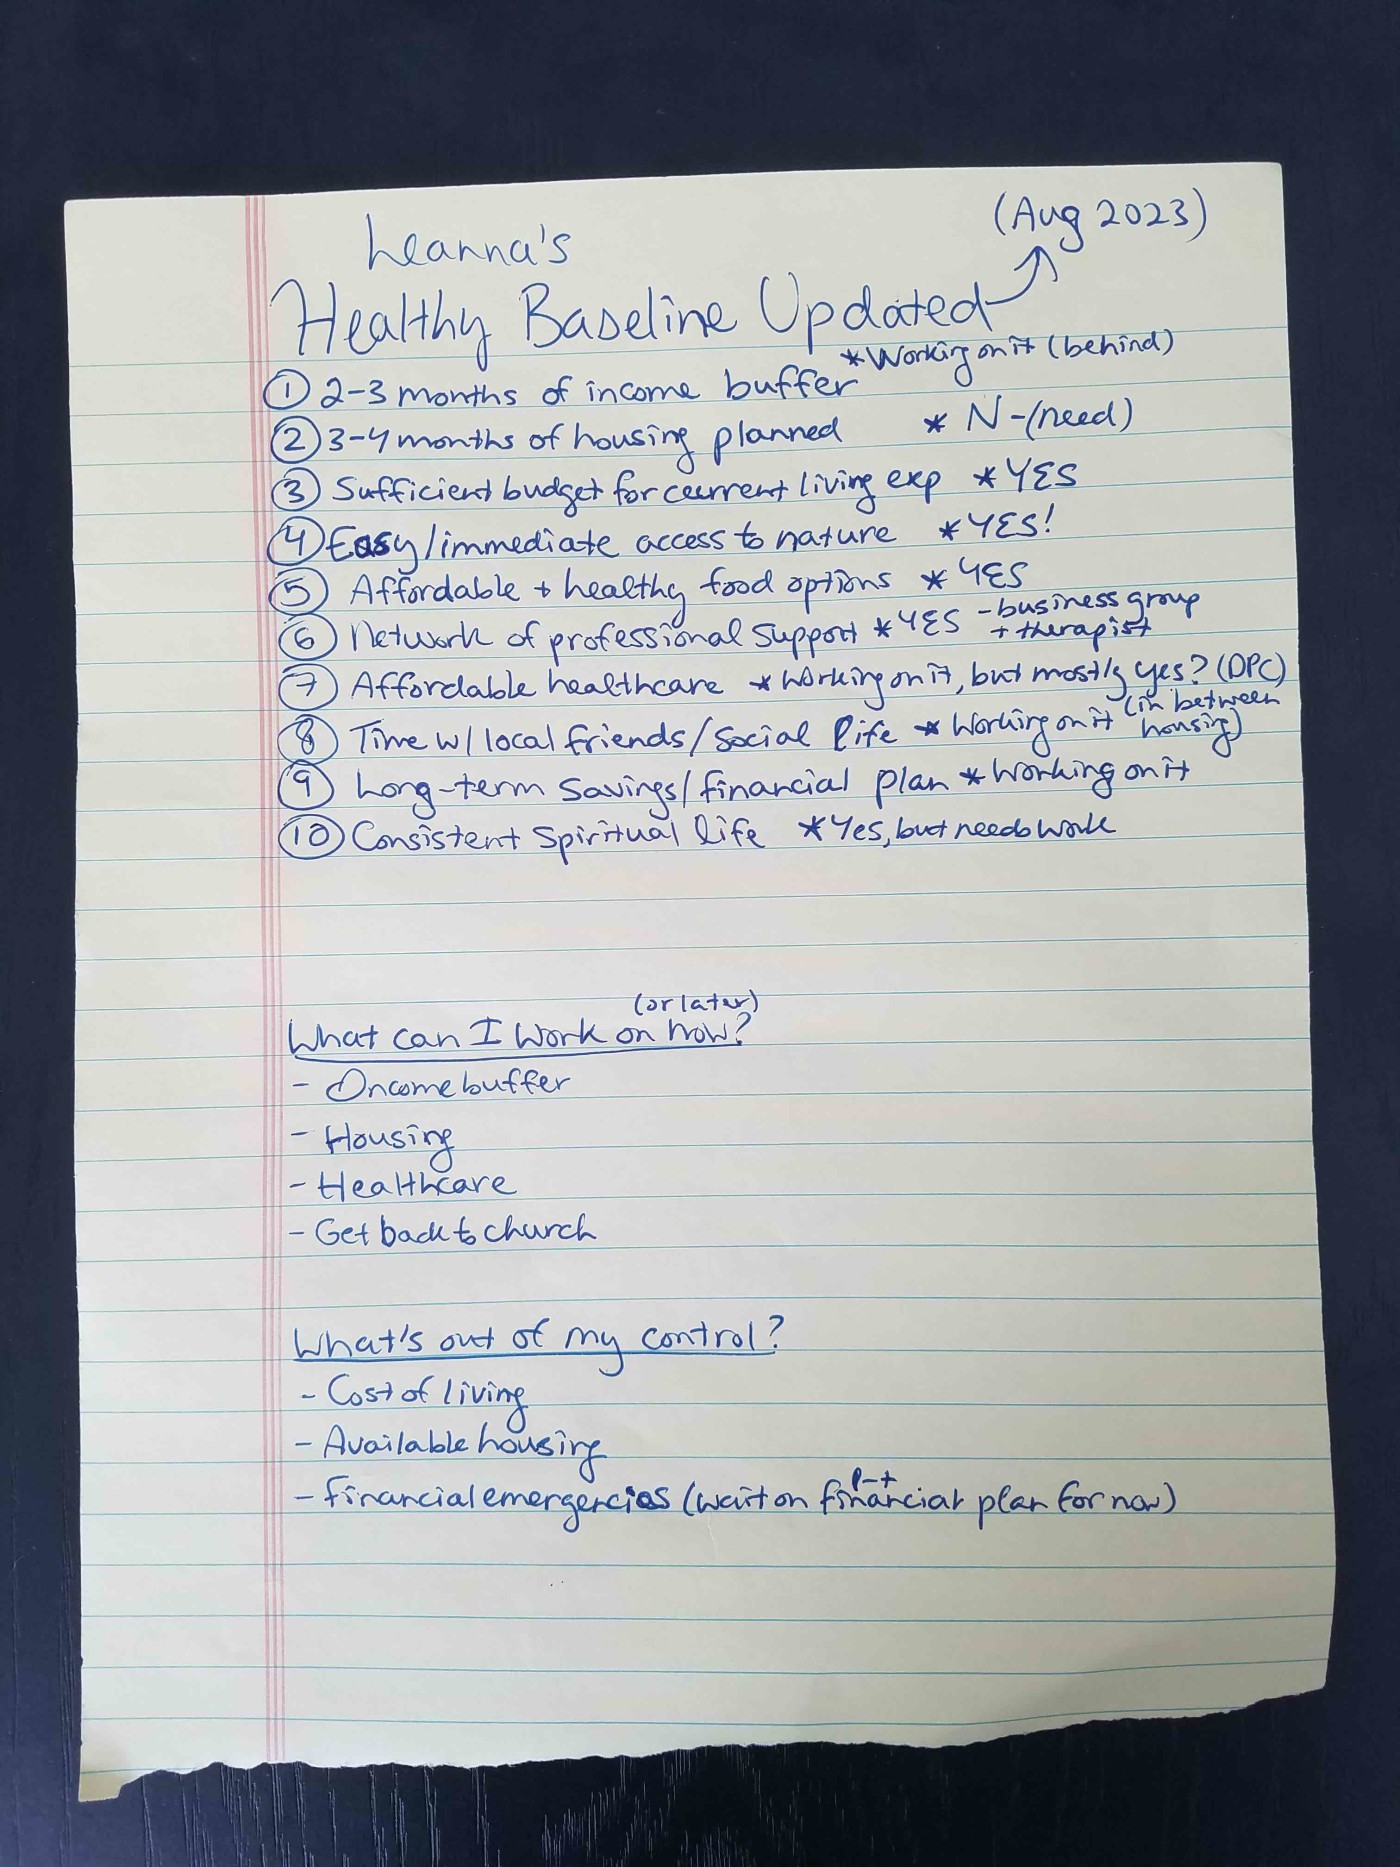 Leanna's updated healthy baseline checklist review